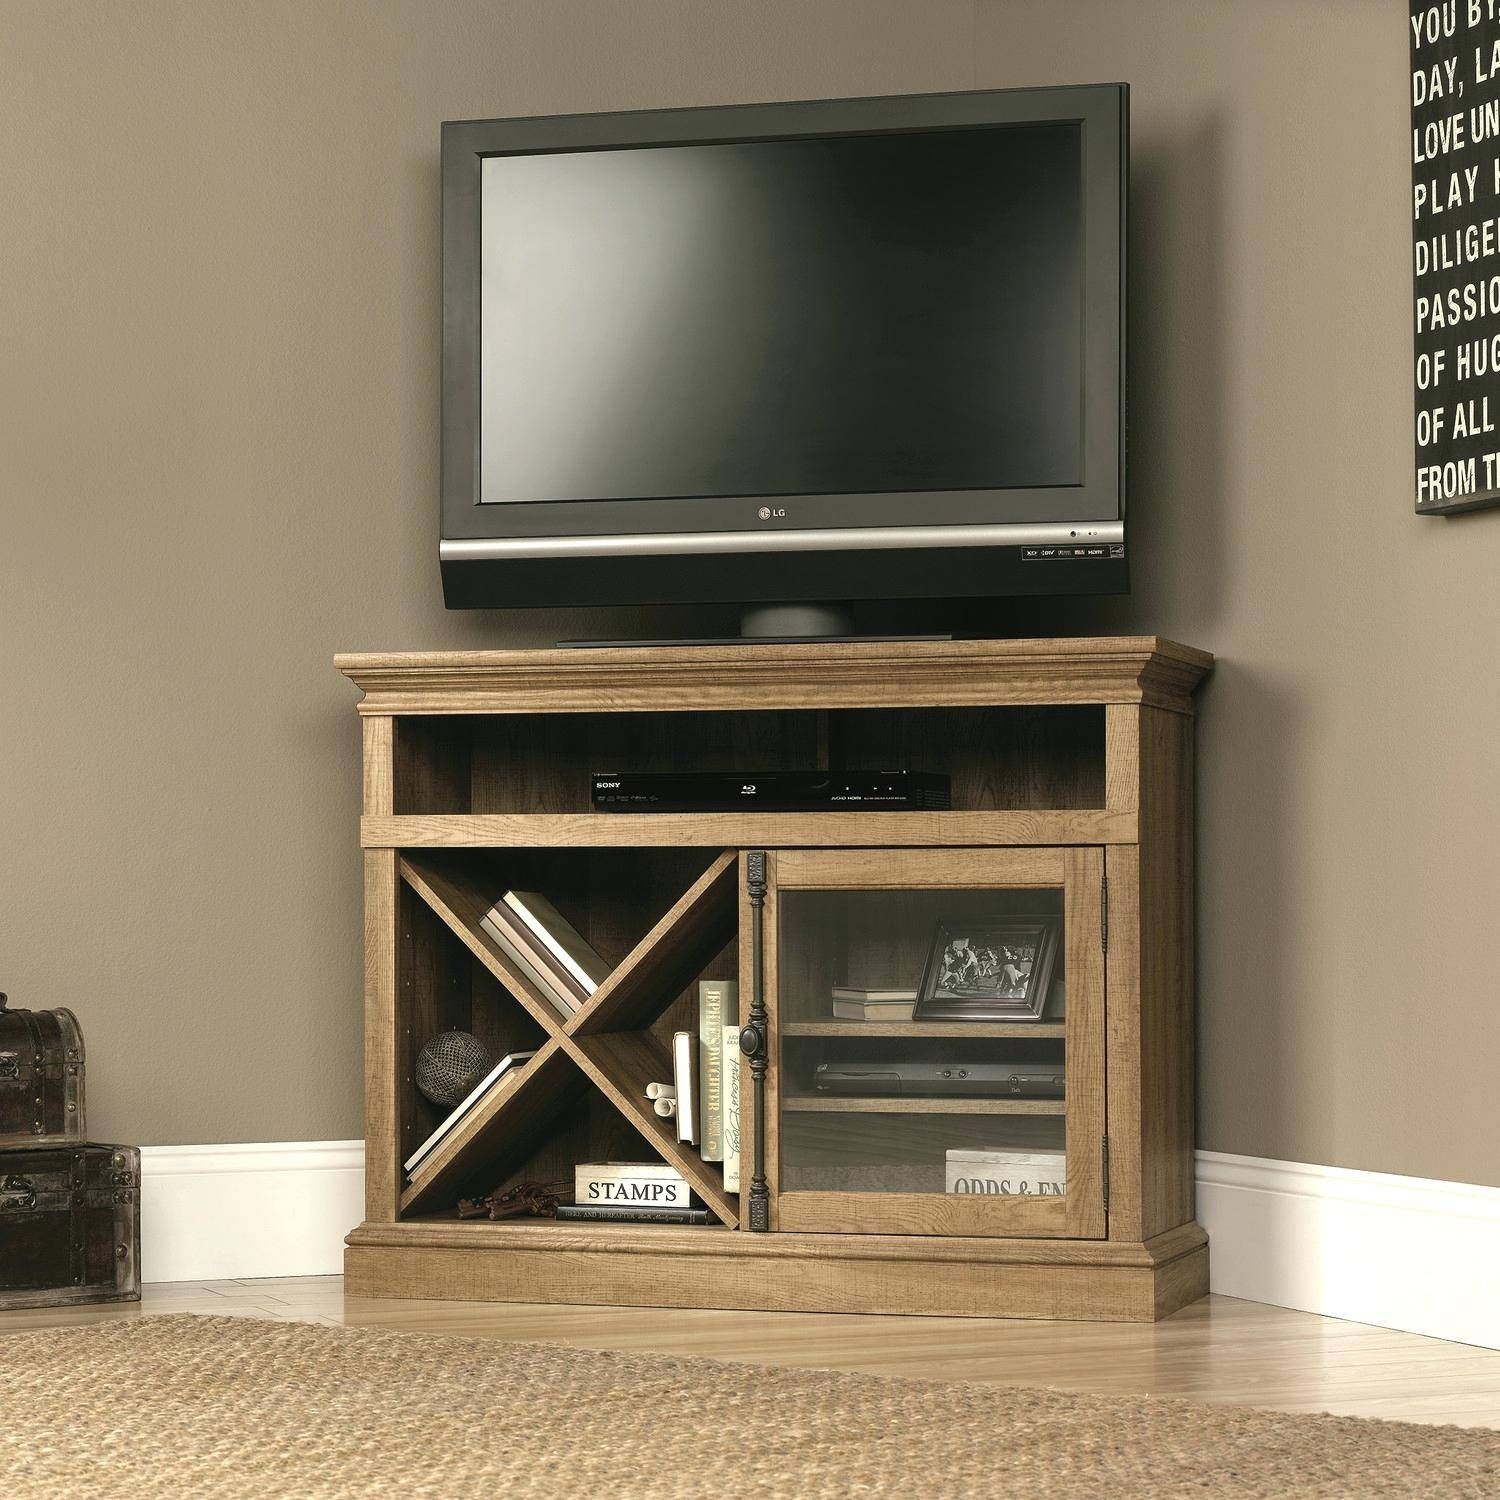 Tv Stand : Highboy Tv Stand Tv Stand For Living Room 66 Splendid Intended For Birch Tv Stands (View 12 of 15)